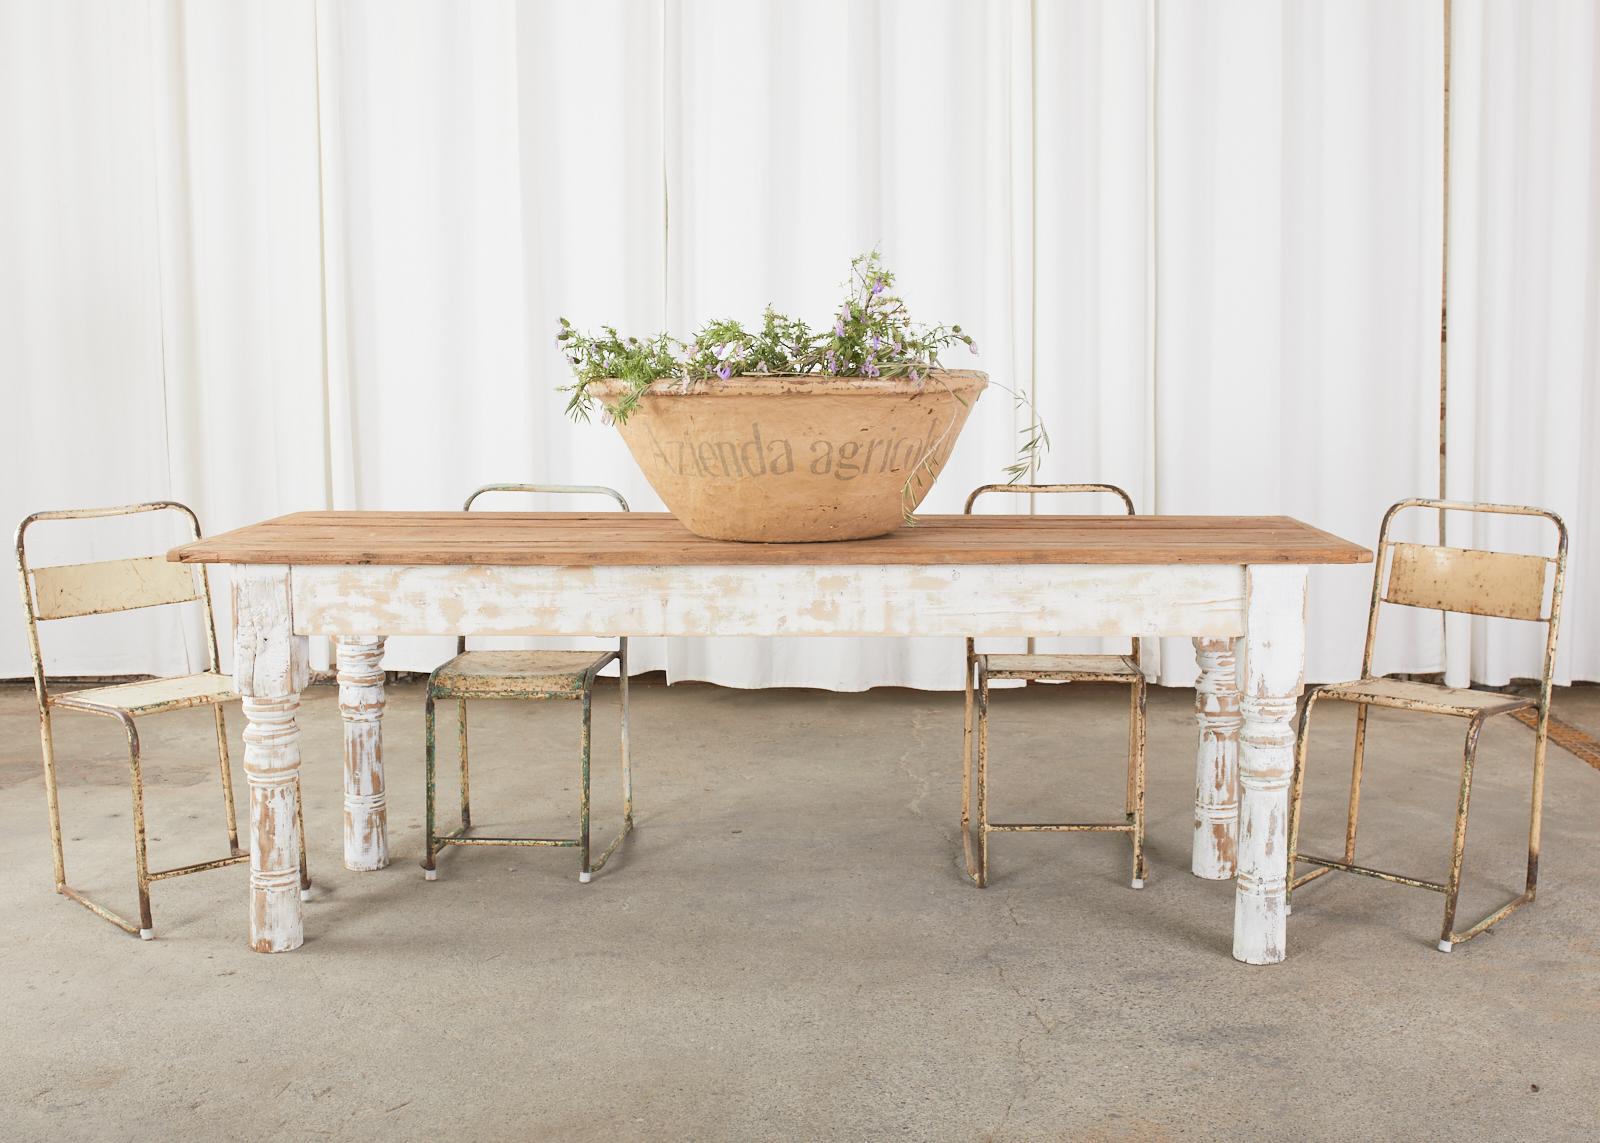 Rustic American country style farmhouse dining table or harvest table crafted from reclaimed pine. The table top features weathered planks of barn wood with breadboard ends. Supported by thick, chunky turned legs measuring 4 inches thick. The turned